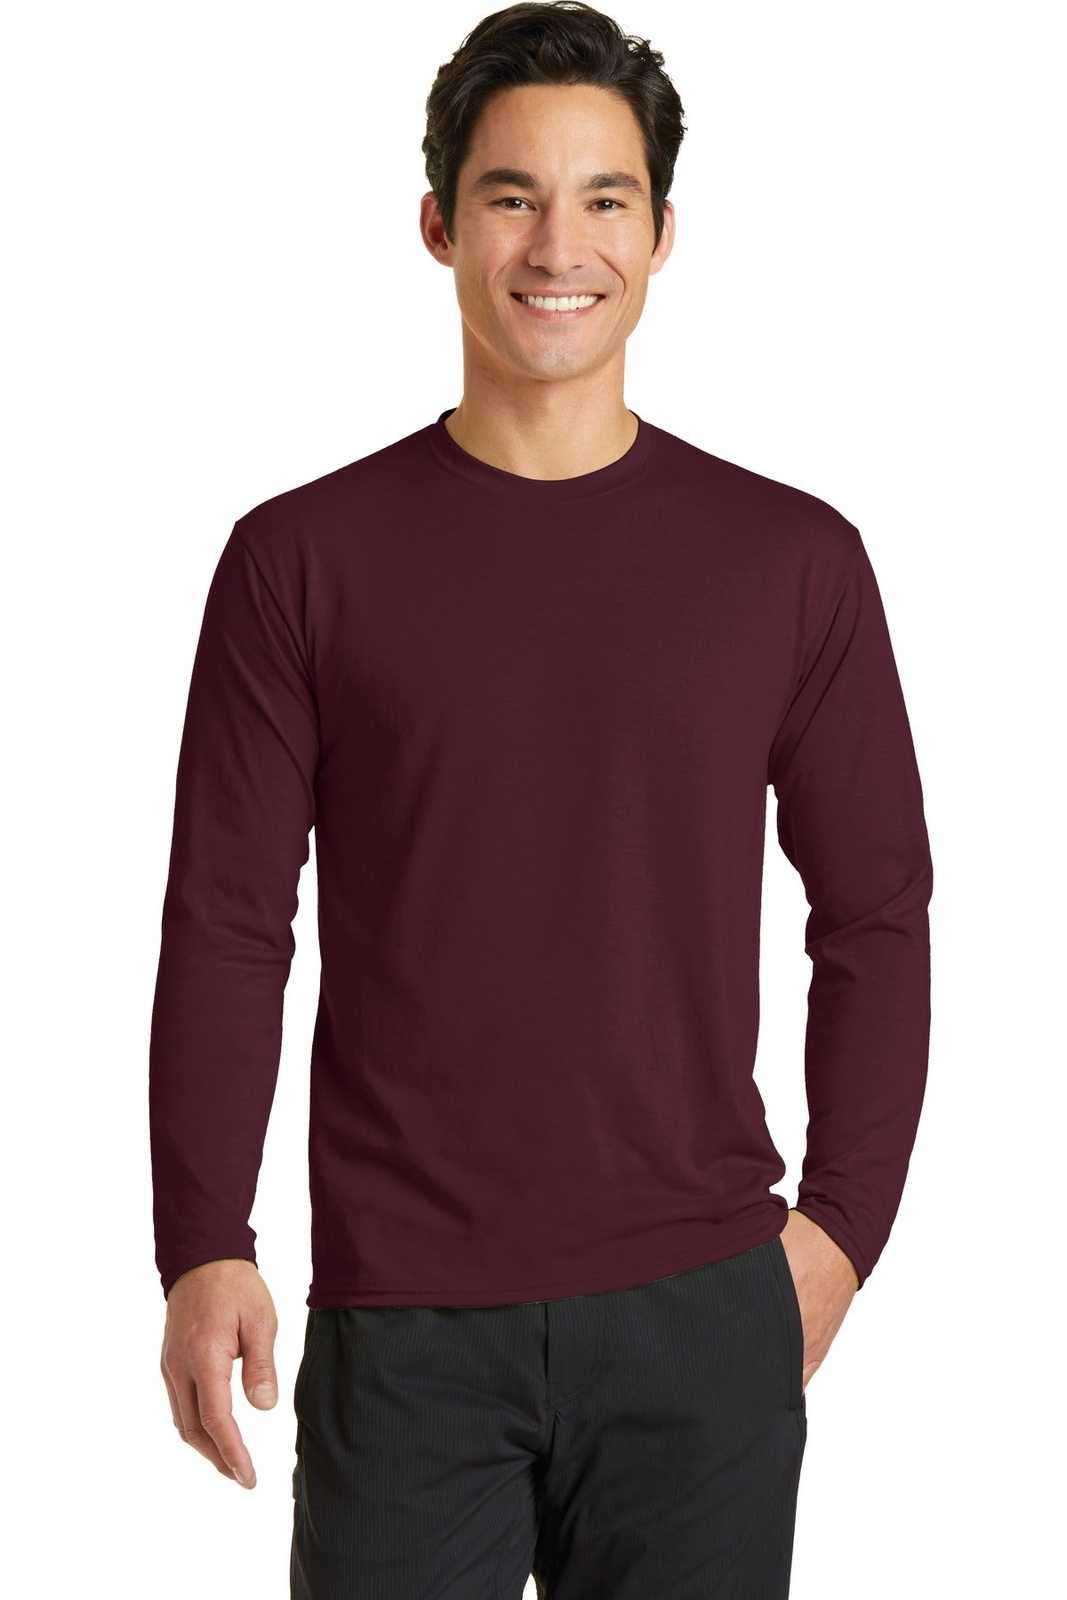 Port & Company PC381LS Long Sleeve Performance Blend Tee - Athletic Maroon - HIT a Double - 1